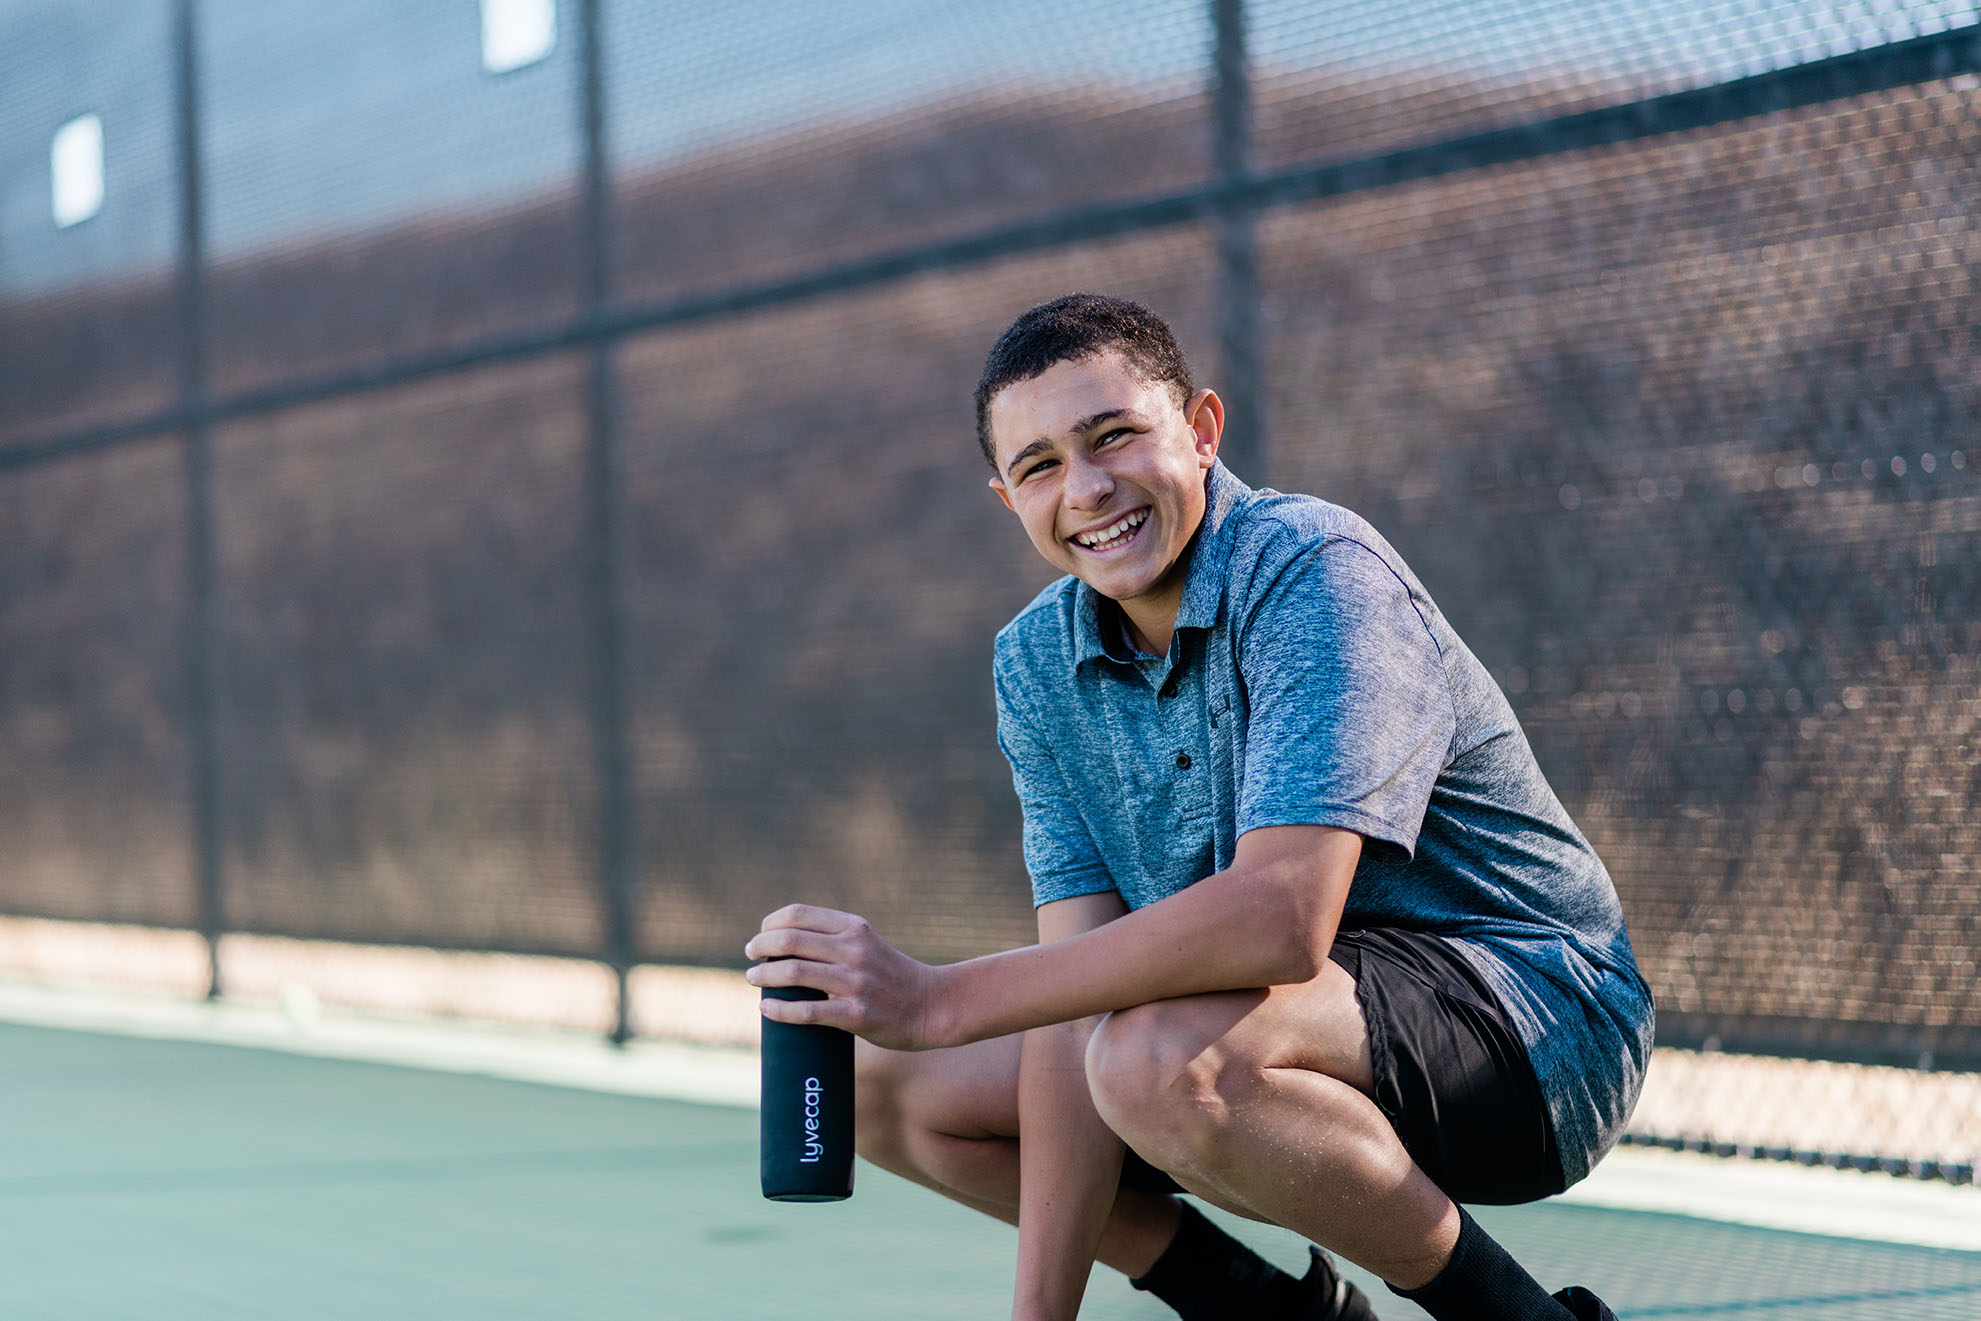 Junior Athlete Aston Davies is smiling on a tennis court with a Lyvecap bottle 